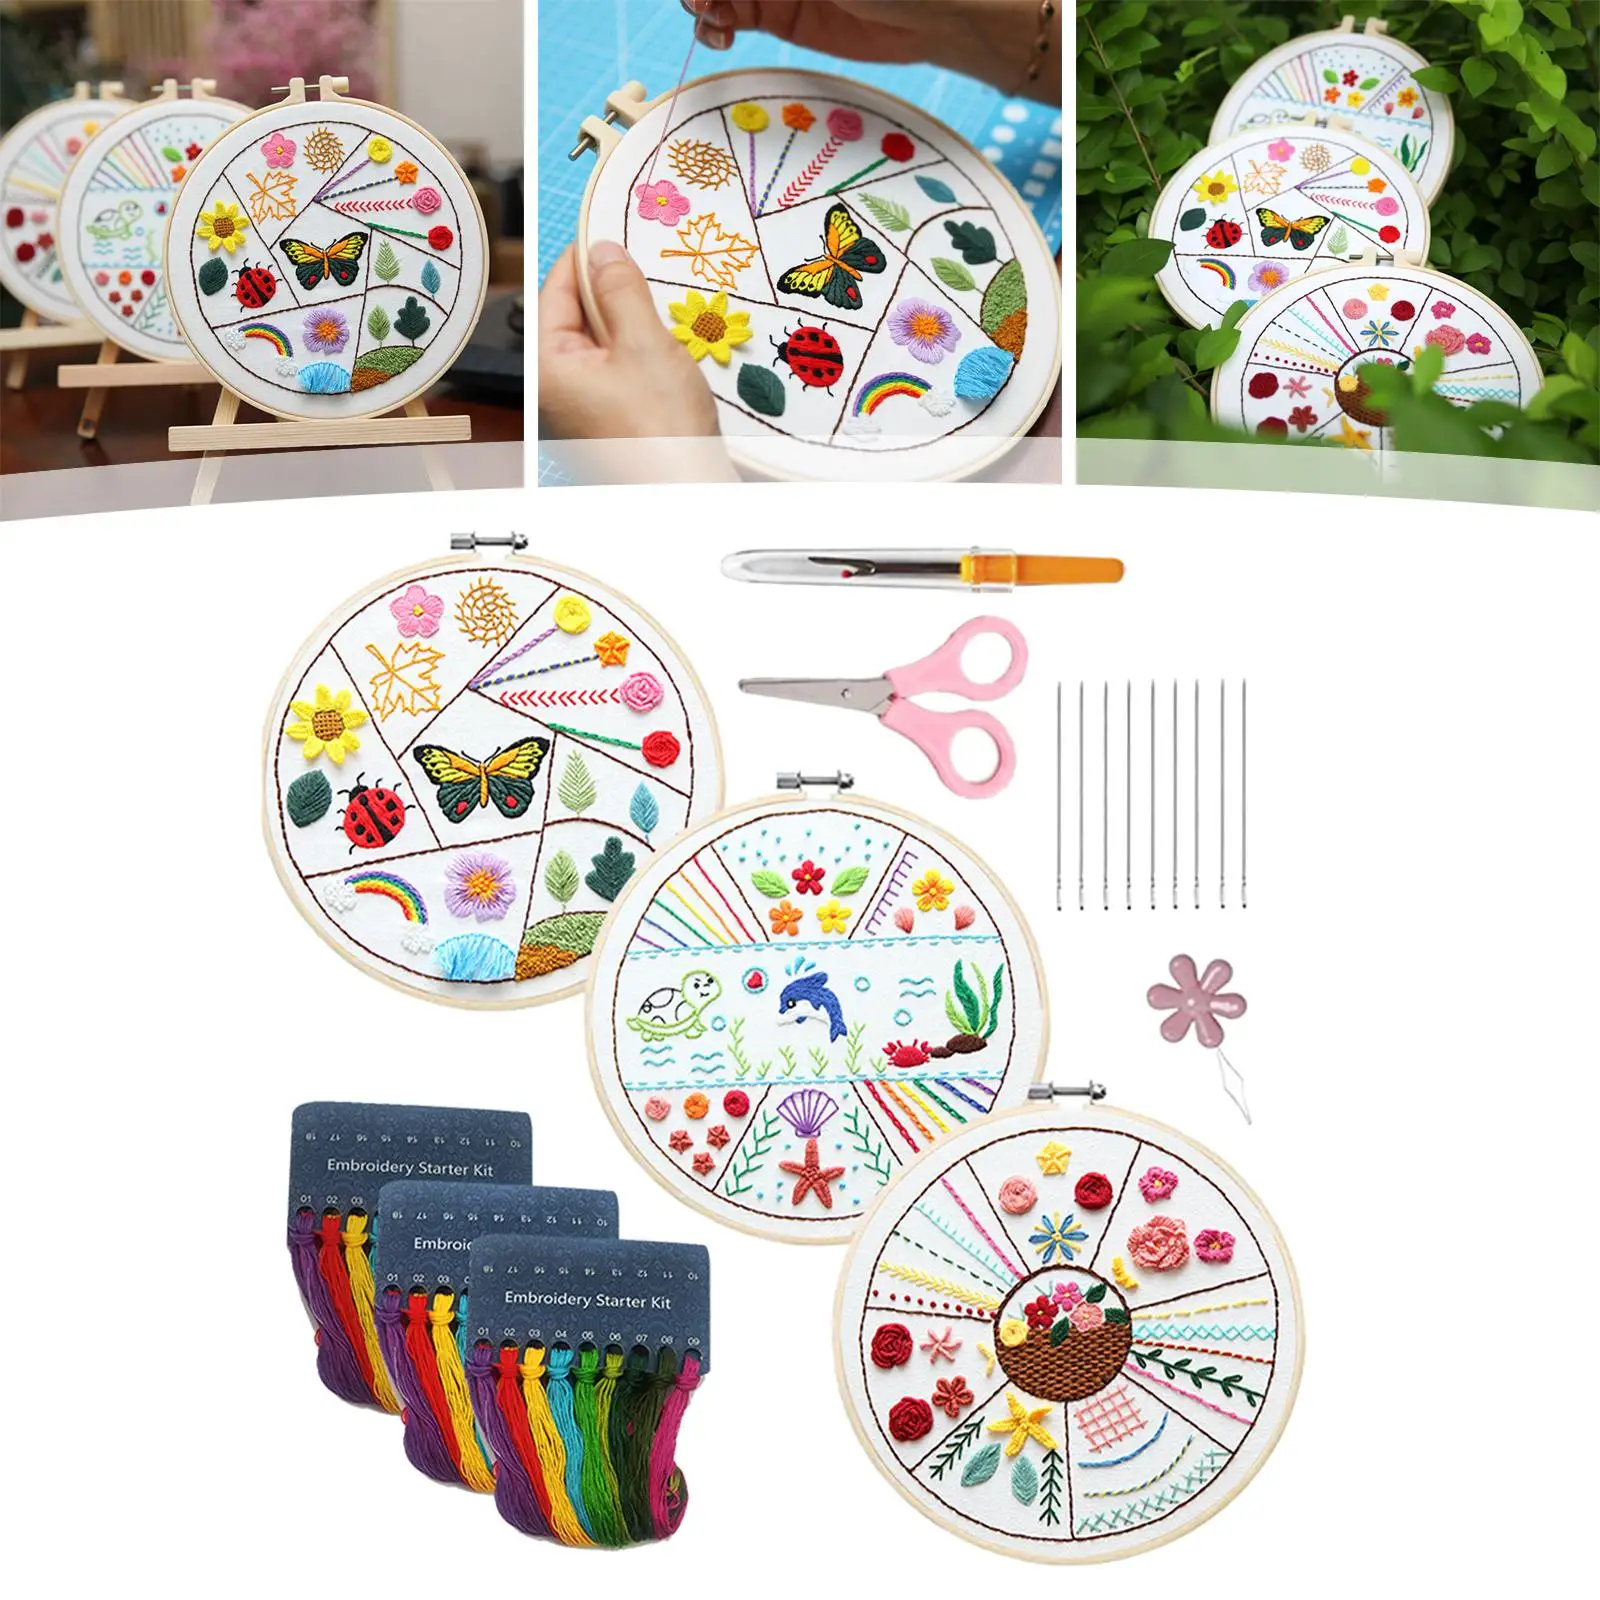 Embroidery Stitch Practice Kit with Pattern Decoration Durable Gift with Embroidery Hoop for Beginners Needlework DIY Practice